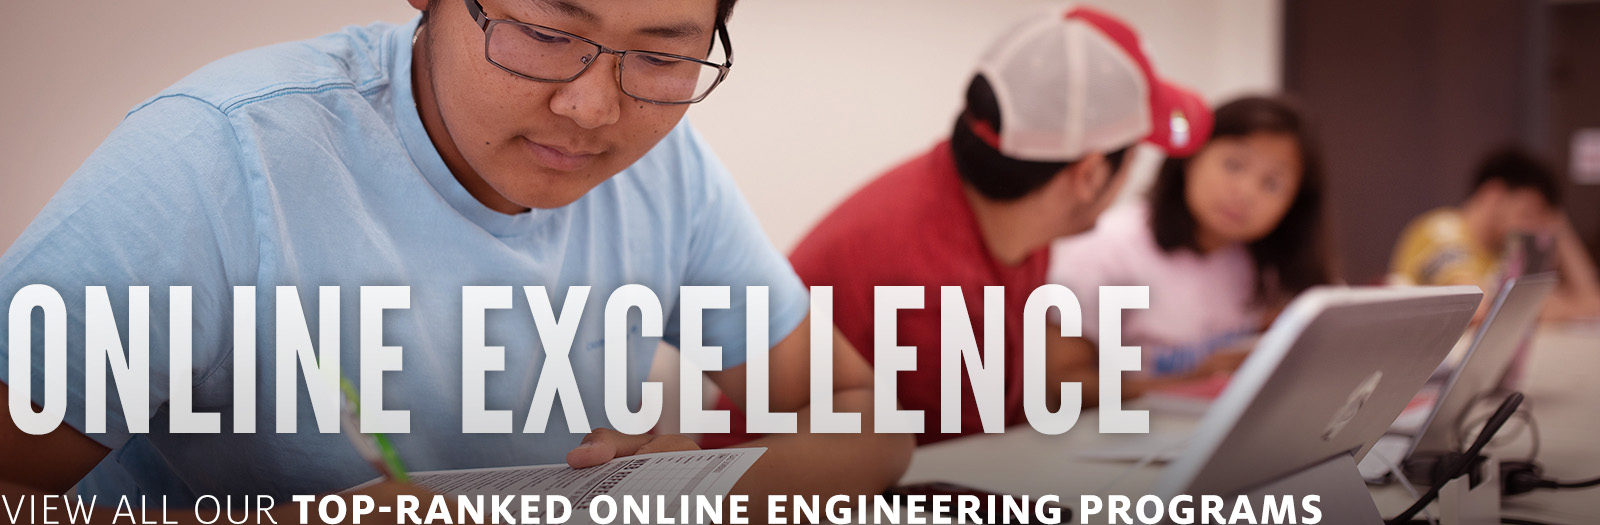 Online Excellence